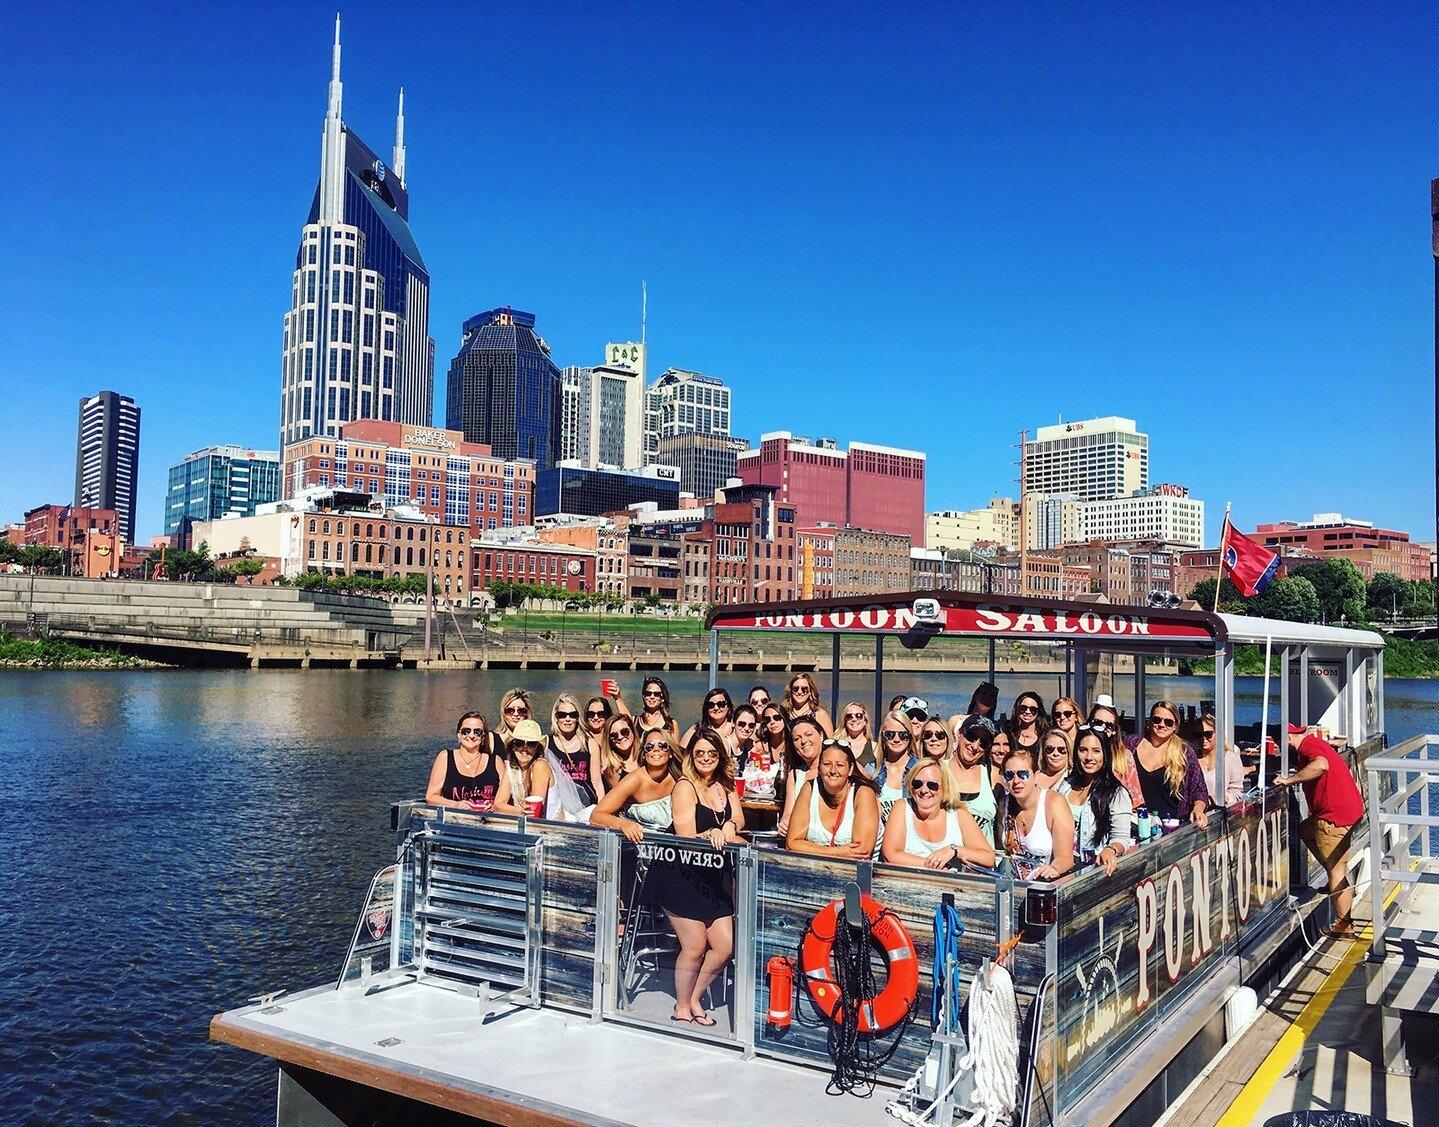 We get it. Sometimes you need to get out of the house and hang out with like-minded people! Check out these upcoming empowerment events:
.
Sunday, August 14: Moms' Mimosa Cruise with @pontoonsaloon 🛥🥂
.
Monday, August 29: Just Us Moms Play (J.U.M.P